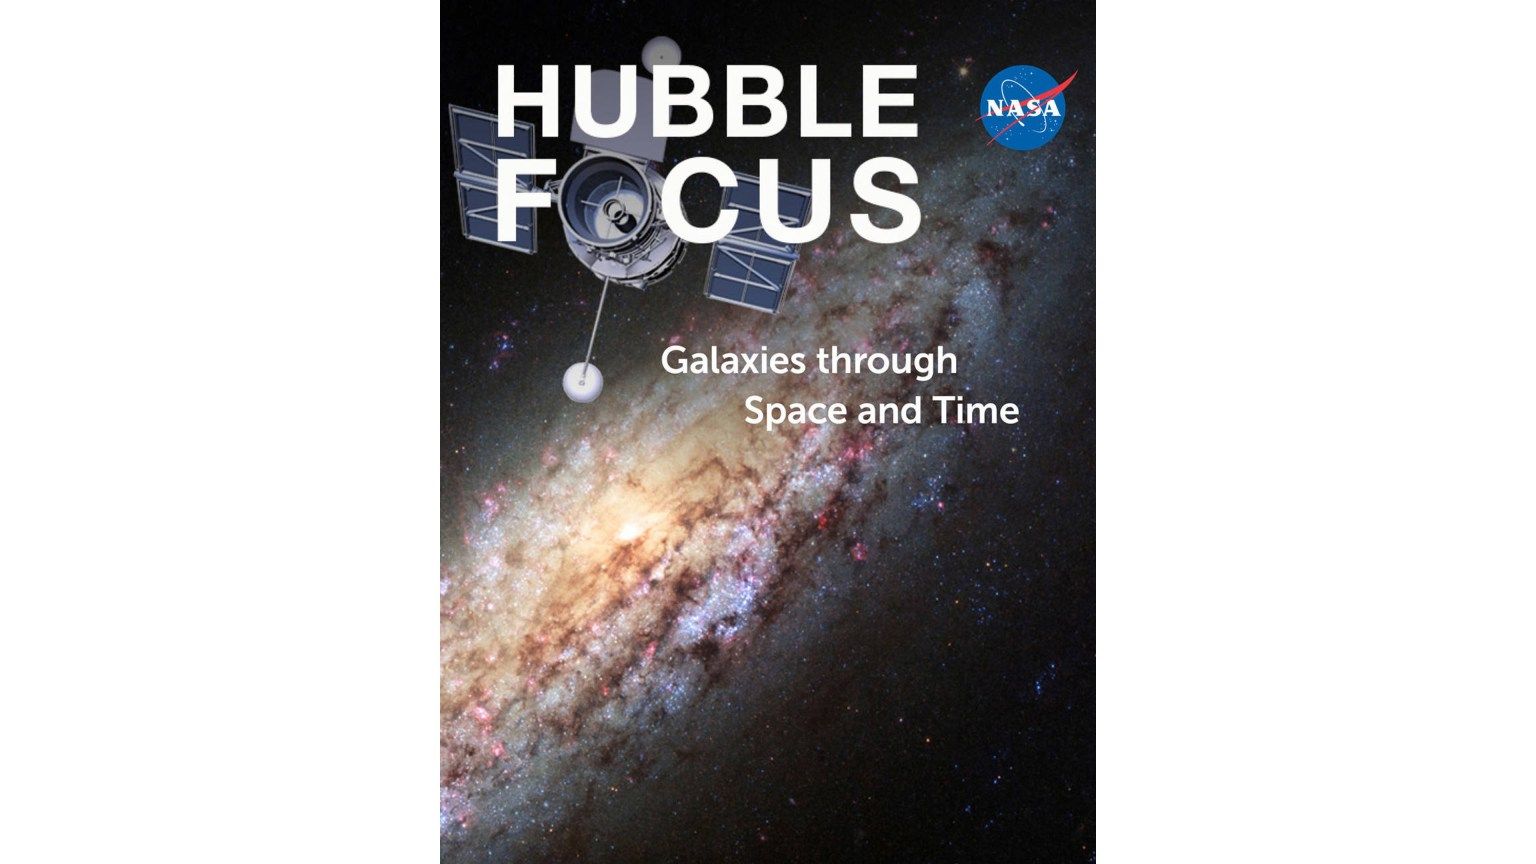 A n e-book cover for the Hubble Focus-Galaxies Through Space And Time book